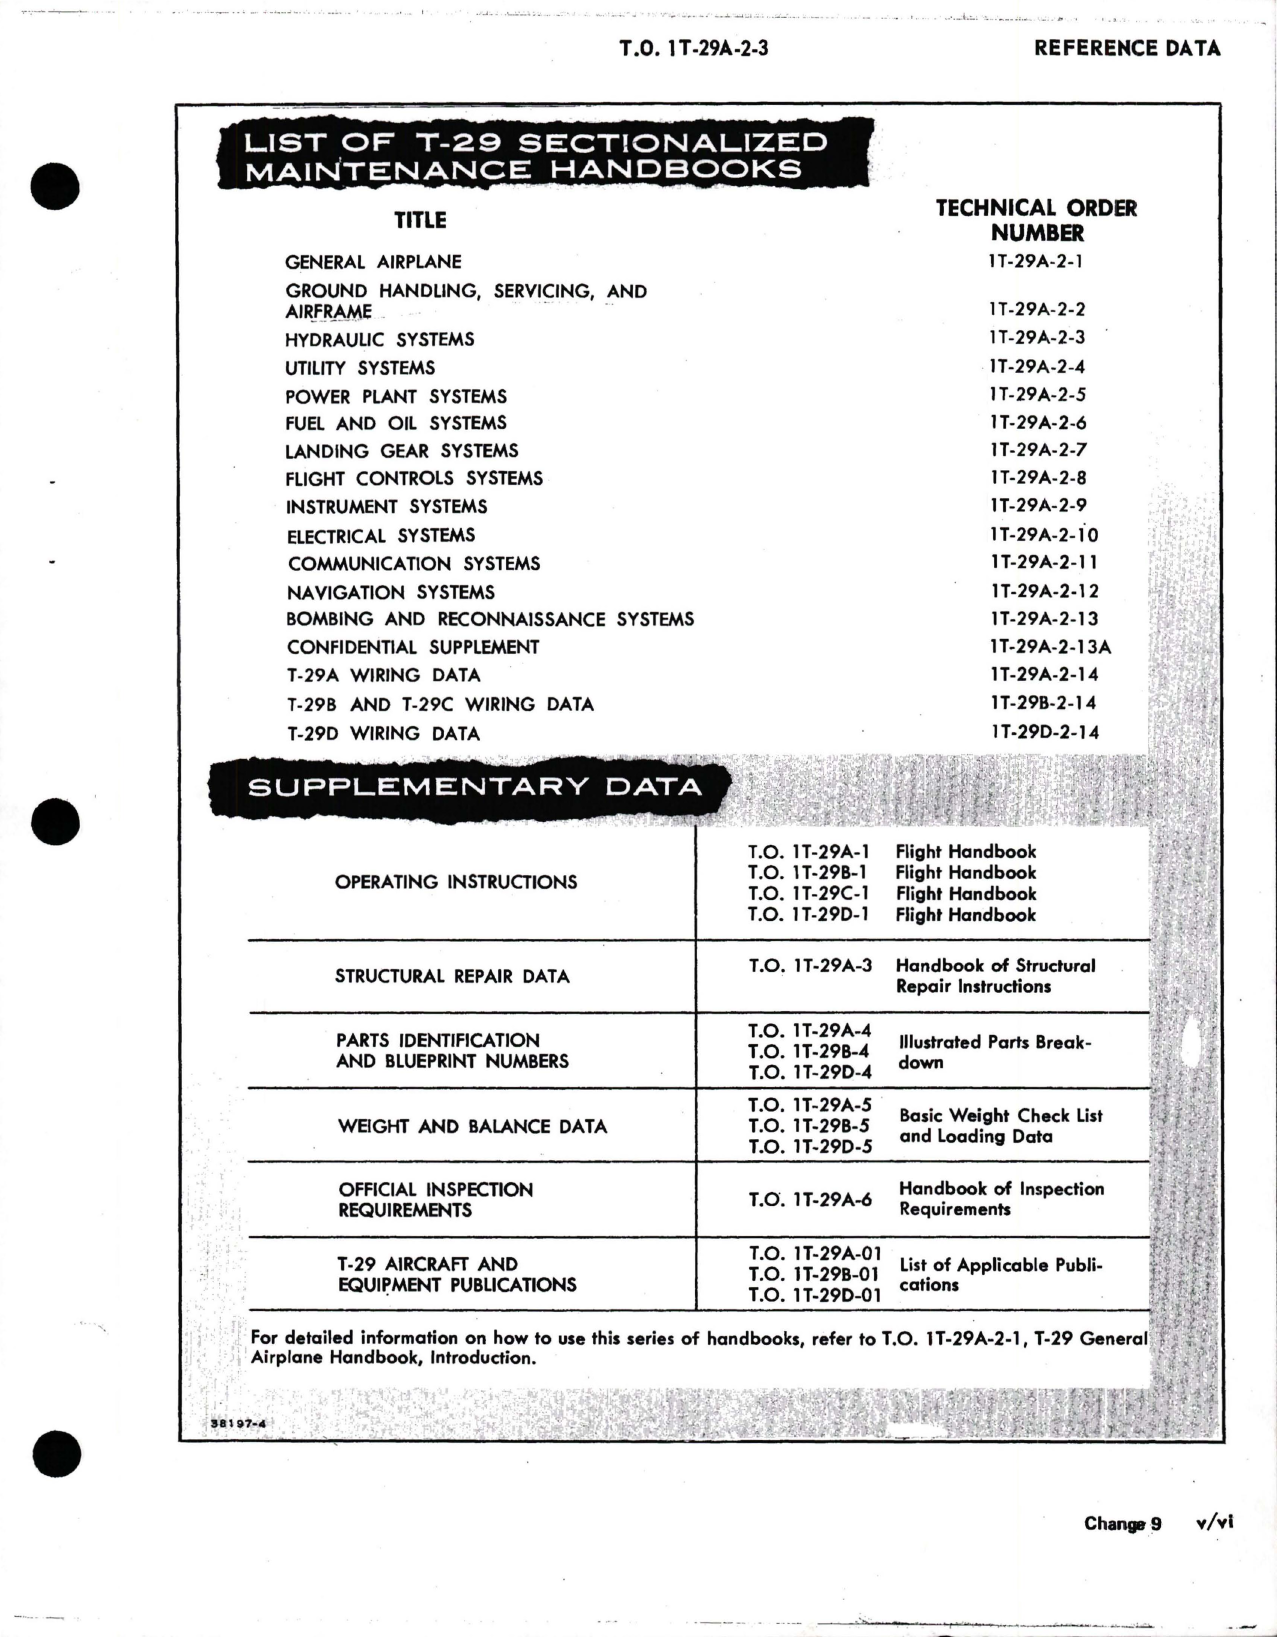 Sample page 7 from AirCorps Library document: Maintenance Manual for Hydraulic Systems for T-29A, T-29B, T-29C and T-29D